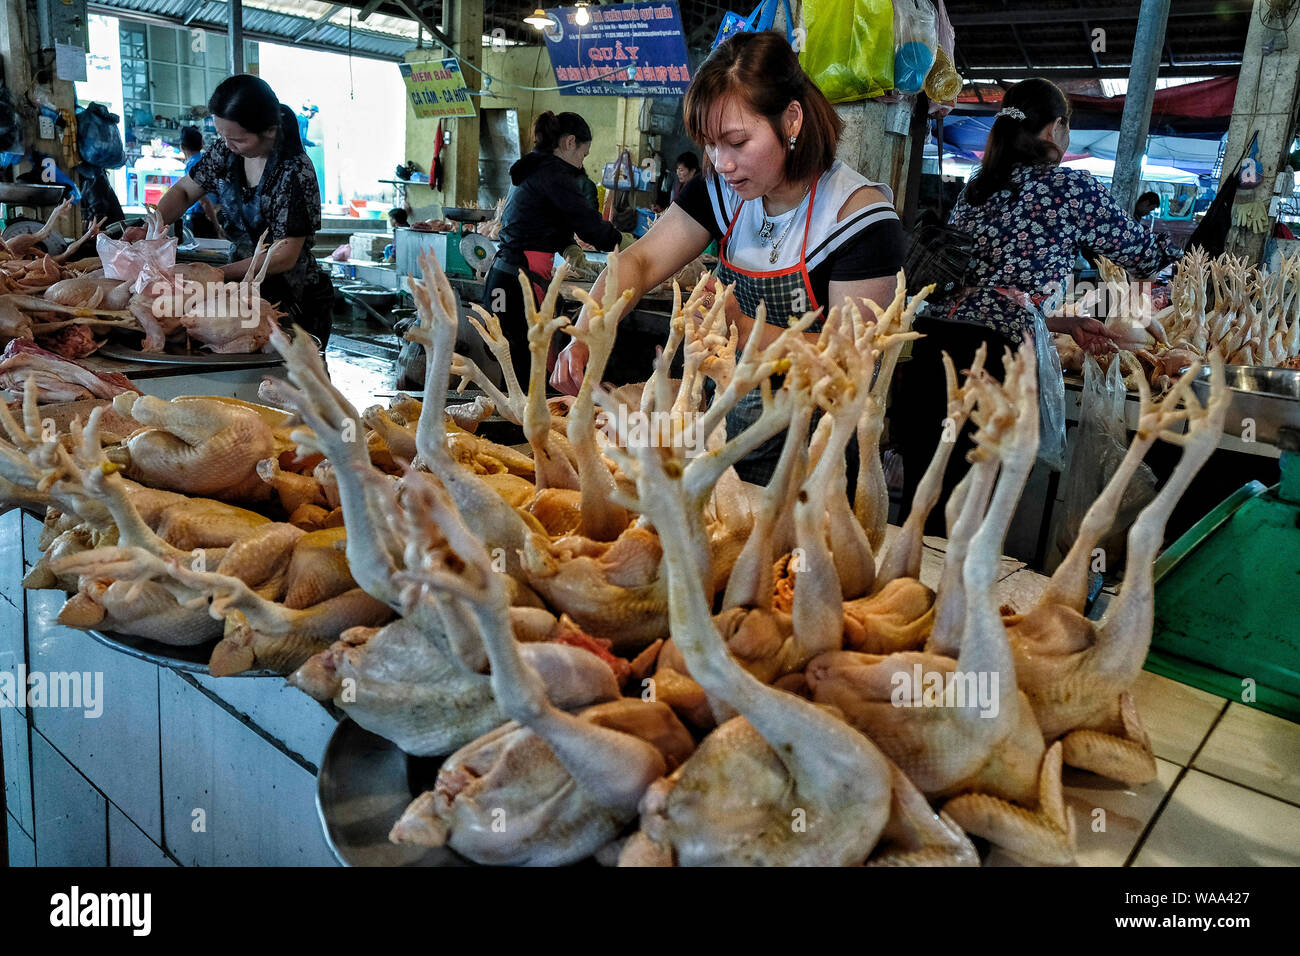 Sa Pa, Vietnam - August 24: Hmong woman selling meat at the market on August 24, 2018 in Sa Pa, Vietnam. Stock Photo